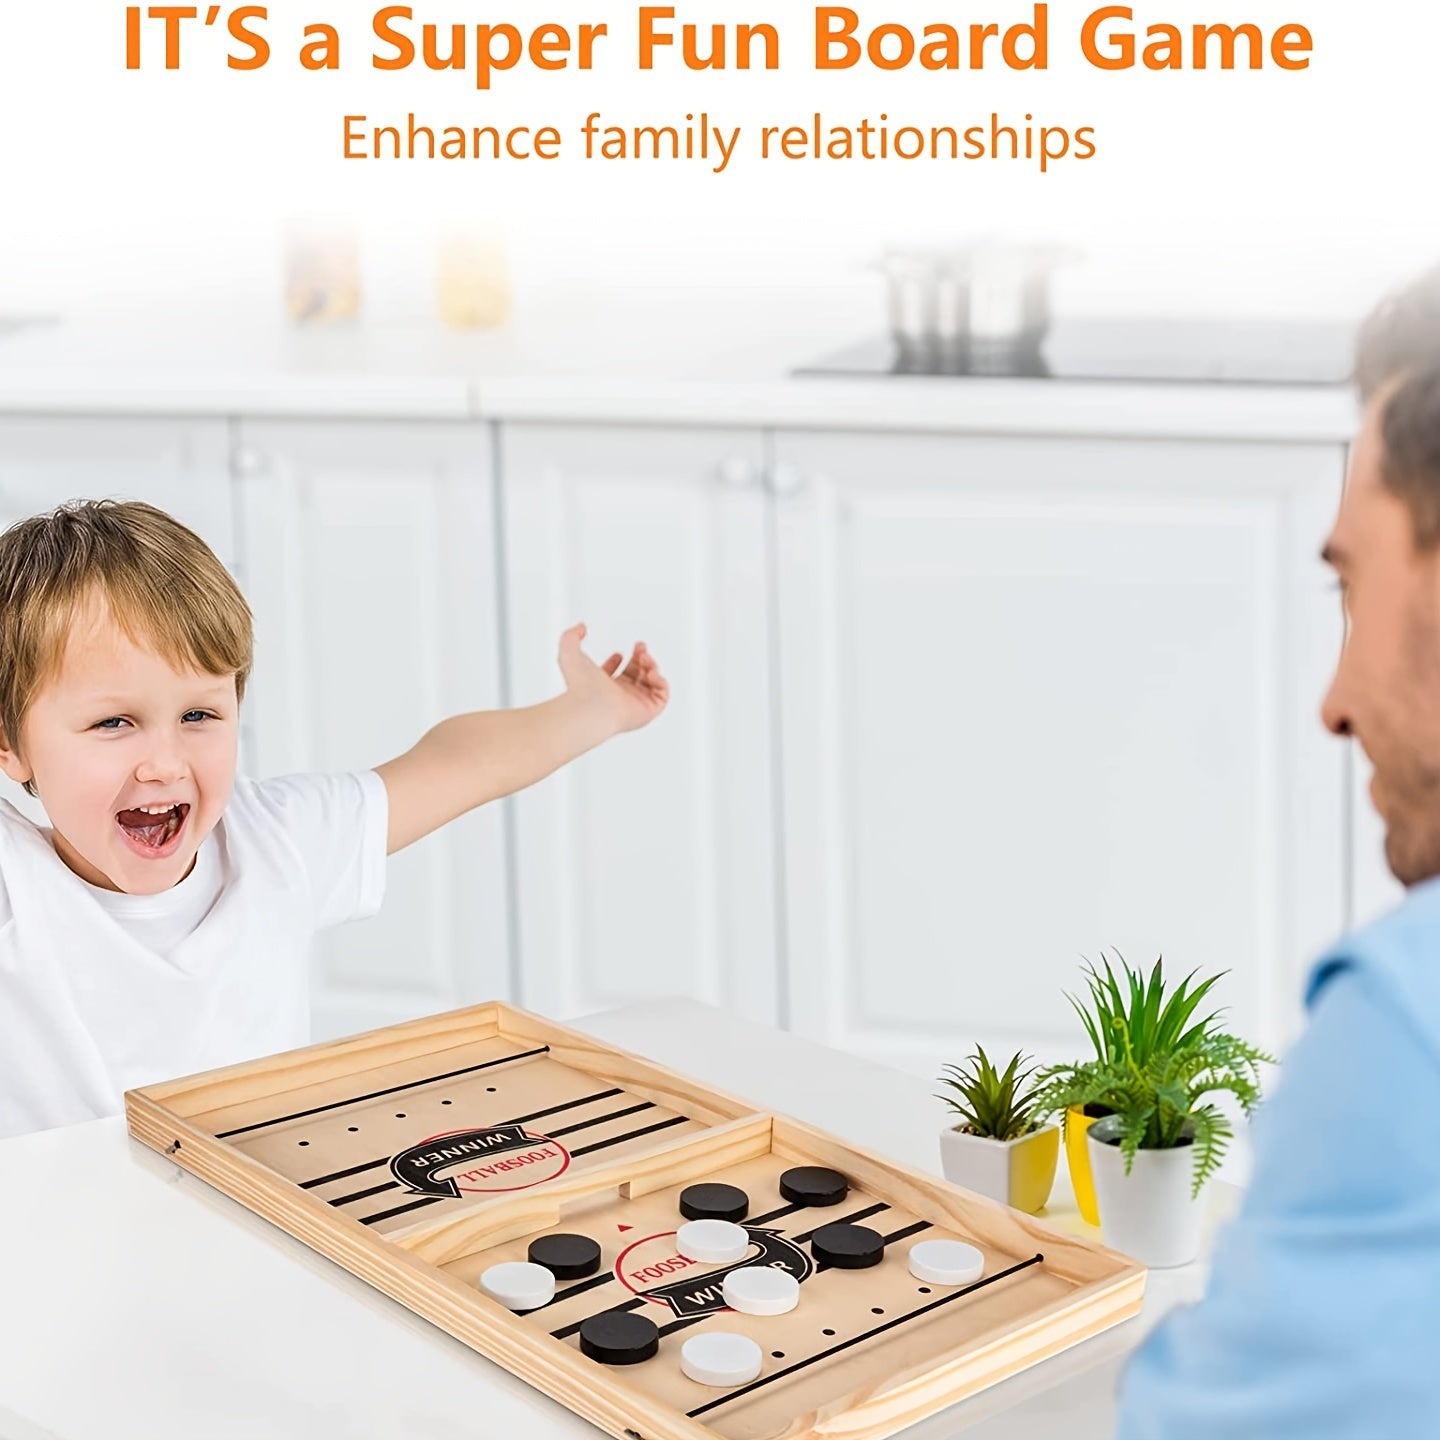 Fast Sling Puck Game,Wooden Hockey Game,Super Foosball Table,Desktop Battle Parent-Child Interaction Winner Slingshot Game,Adults And Kids Family Game Toys - TryKid